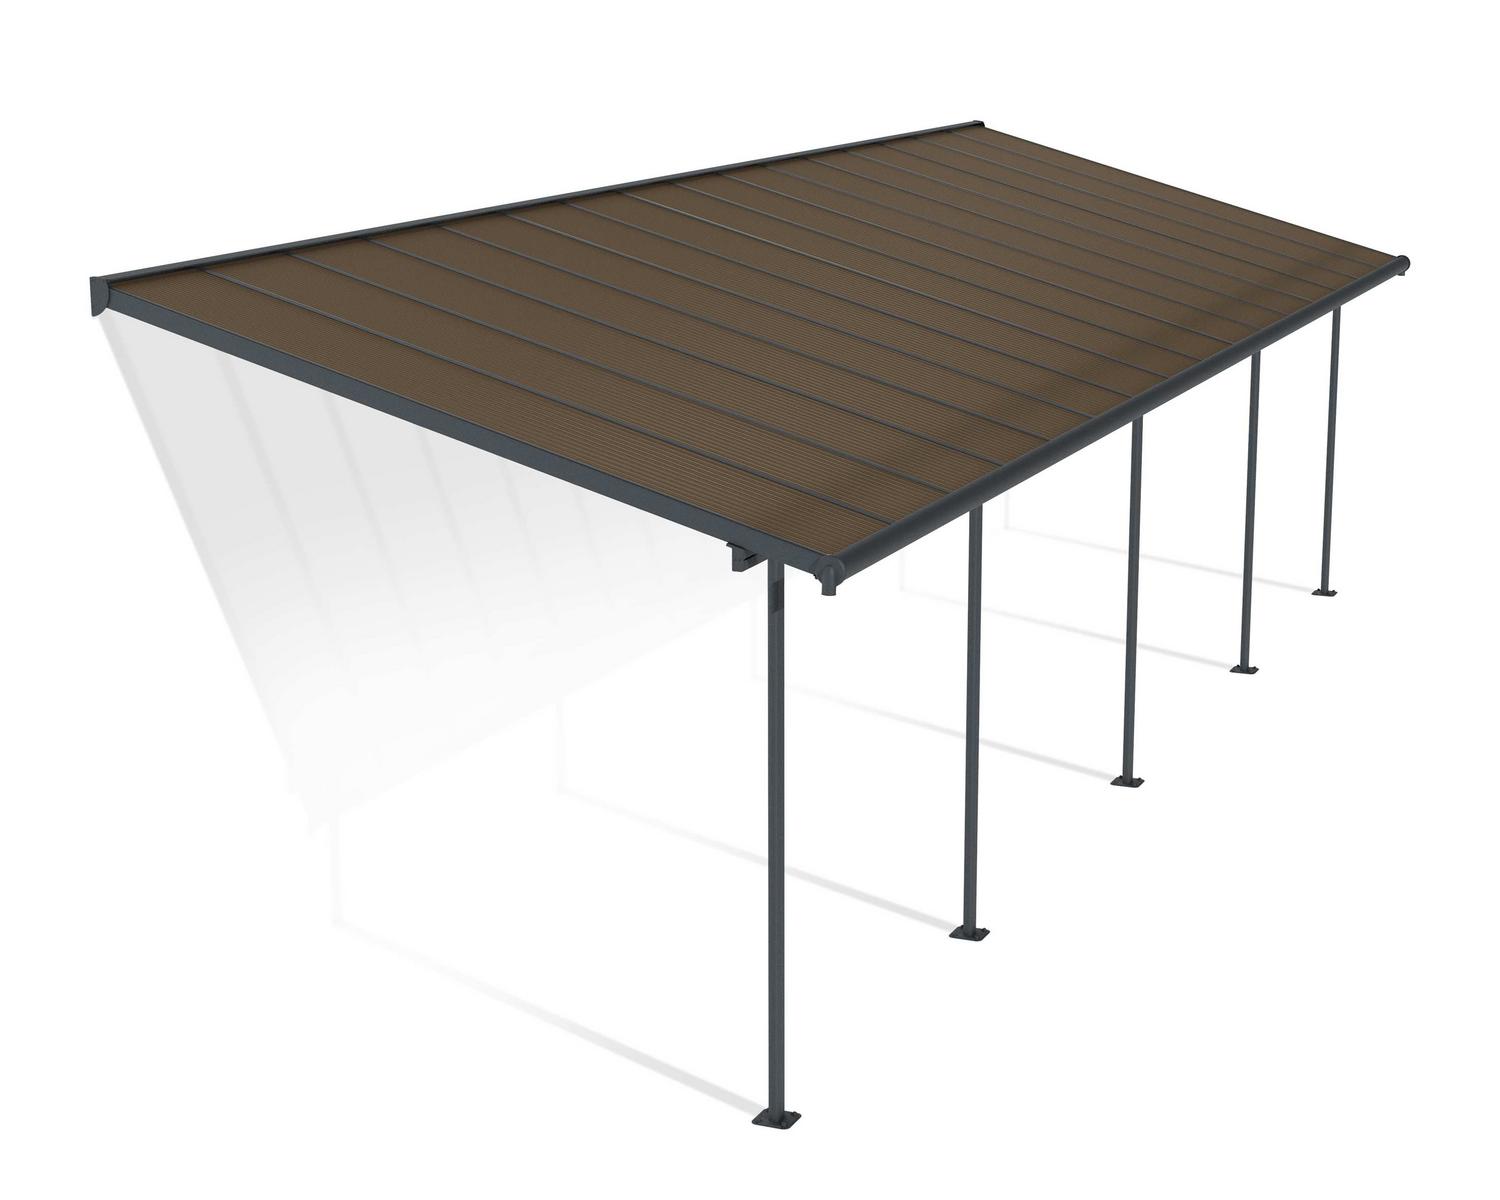 Capri 10 ft. x 32 ft. Grey Aluminium Patio Cover With 5 Posts, Bronze-Tinted Twin-wall Polycarbonate Roof Panels.